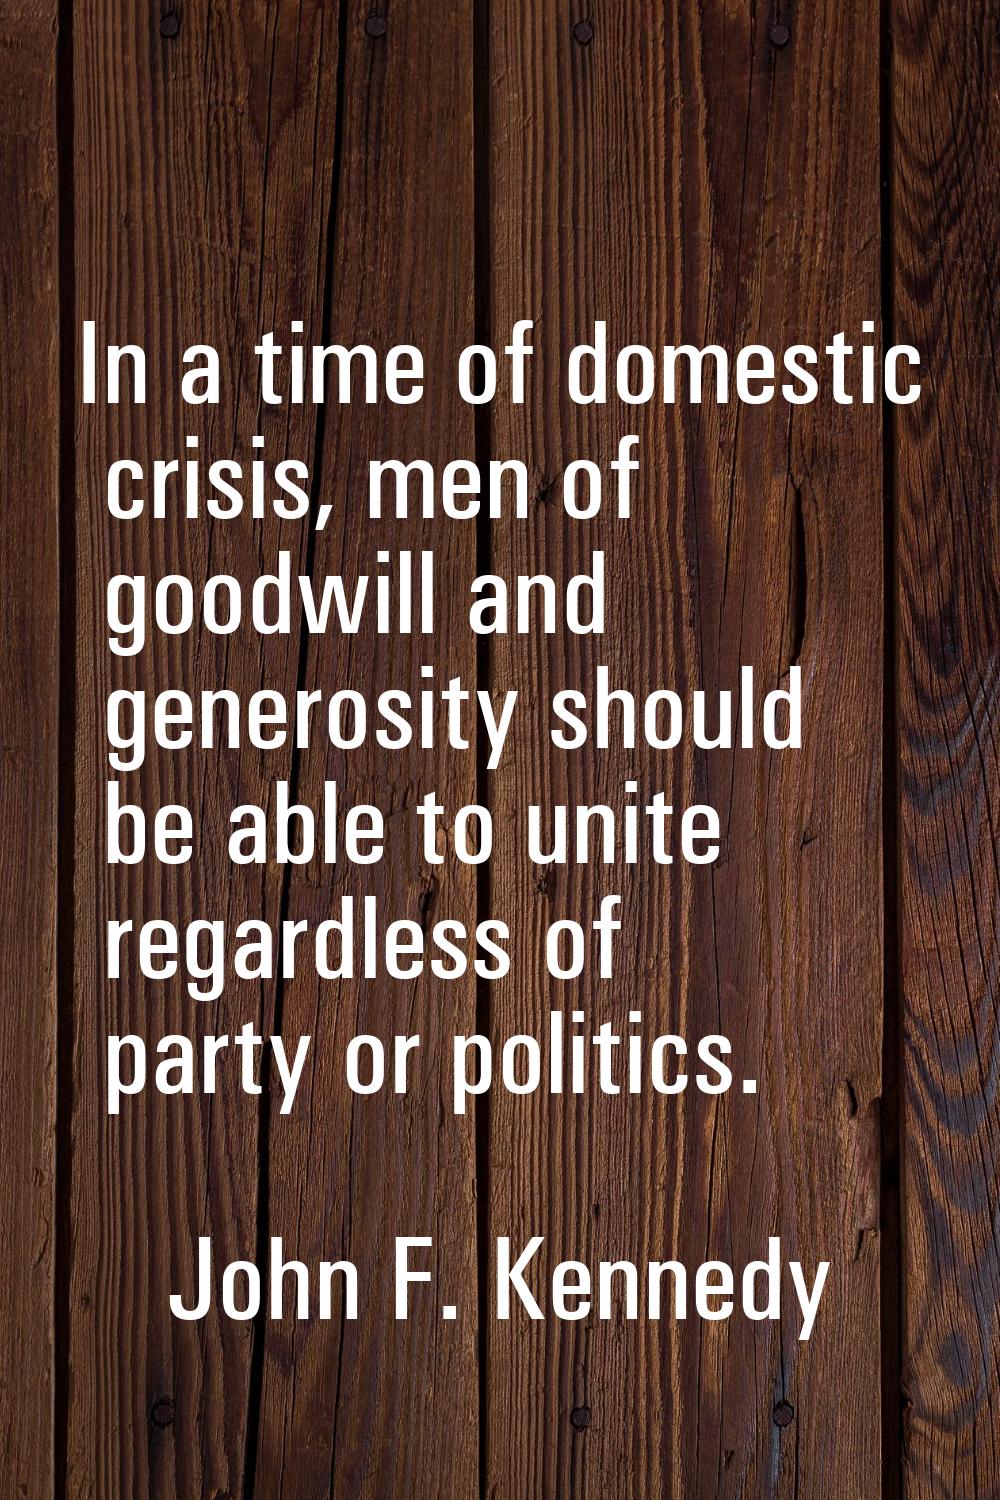 In a time of domestic crisis, men of goodwill and generosity should be able to unite regardless of 